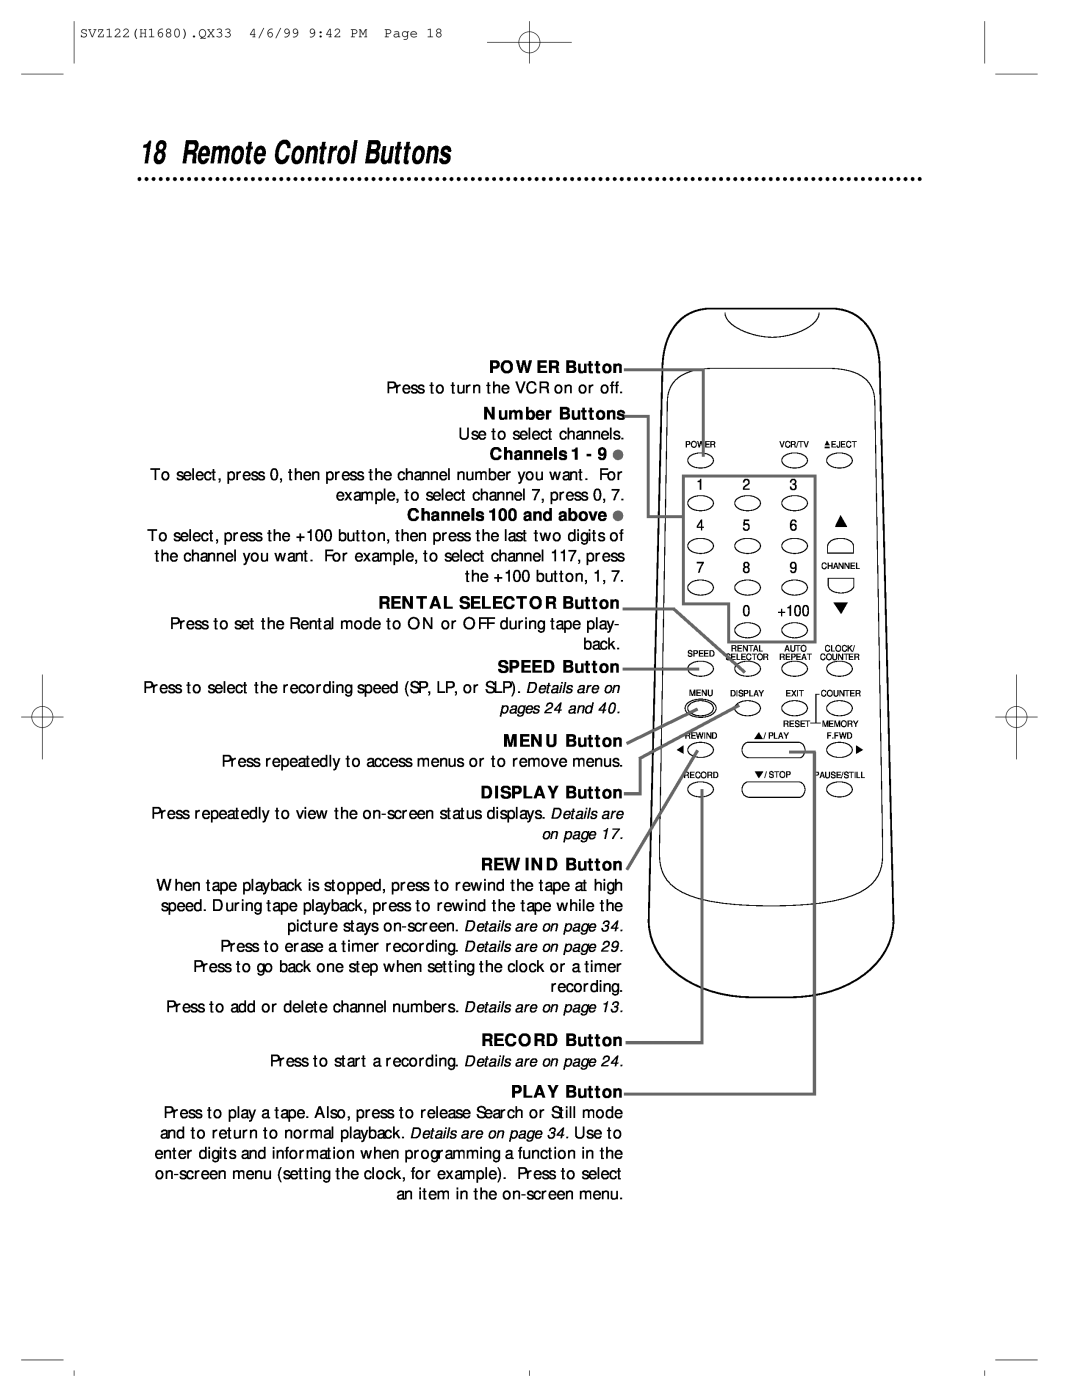 Philips SVZ122 owner manual Remote Control Buttons, POWER Button, Number Buttons, RENTAL SELECTOR Button, RECORD Button 